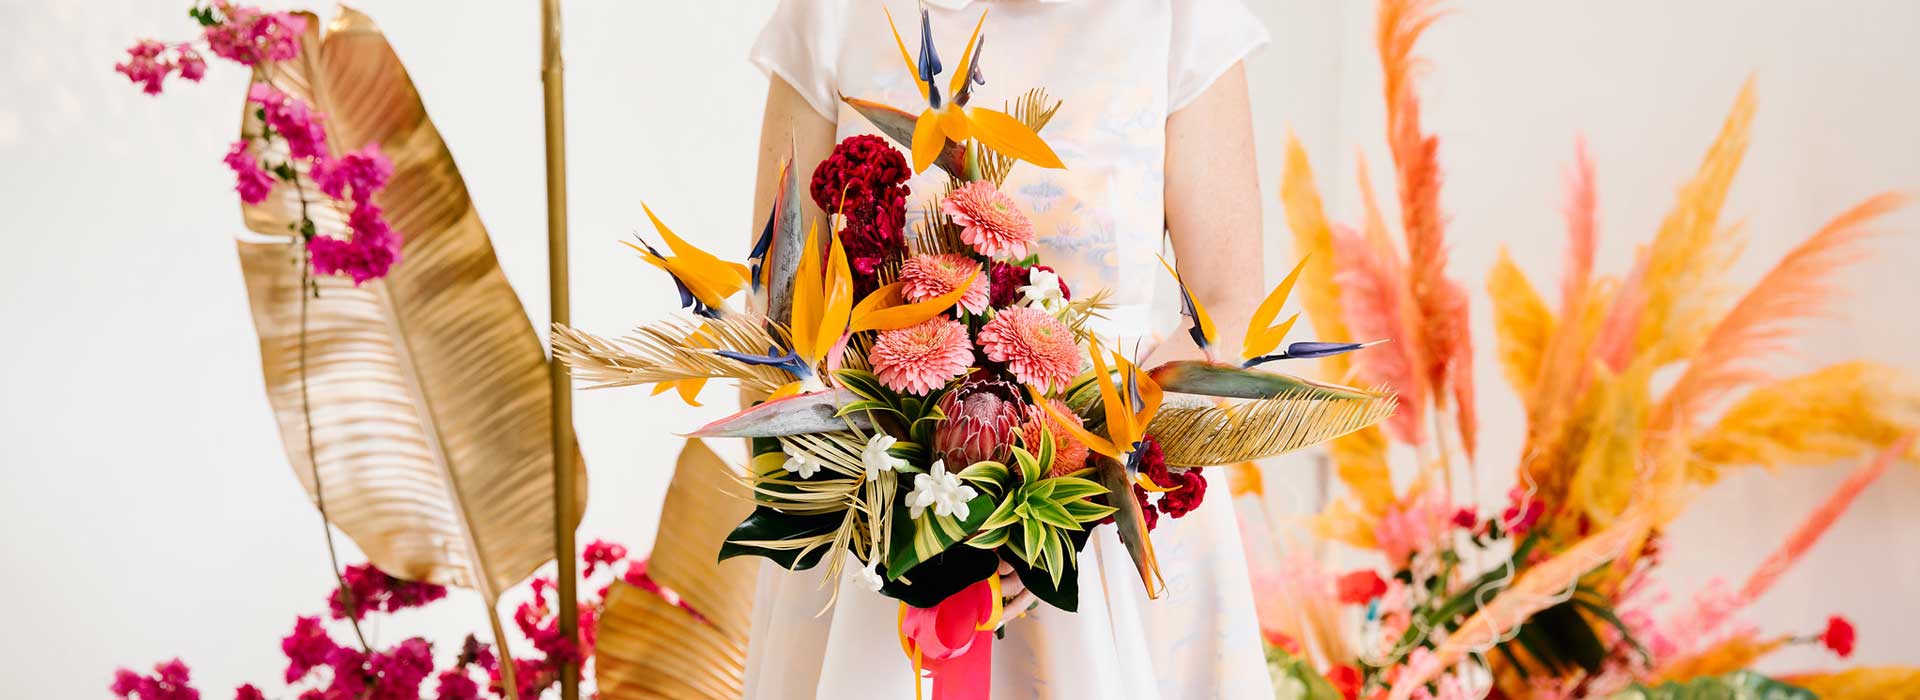 bold colors wedding trends 2021